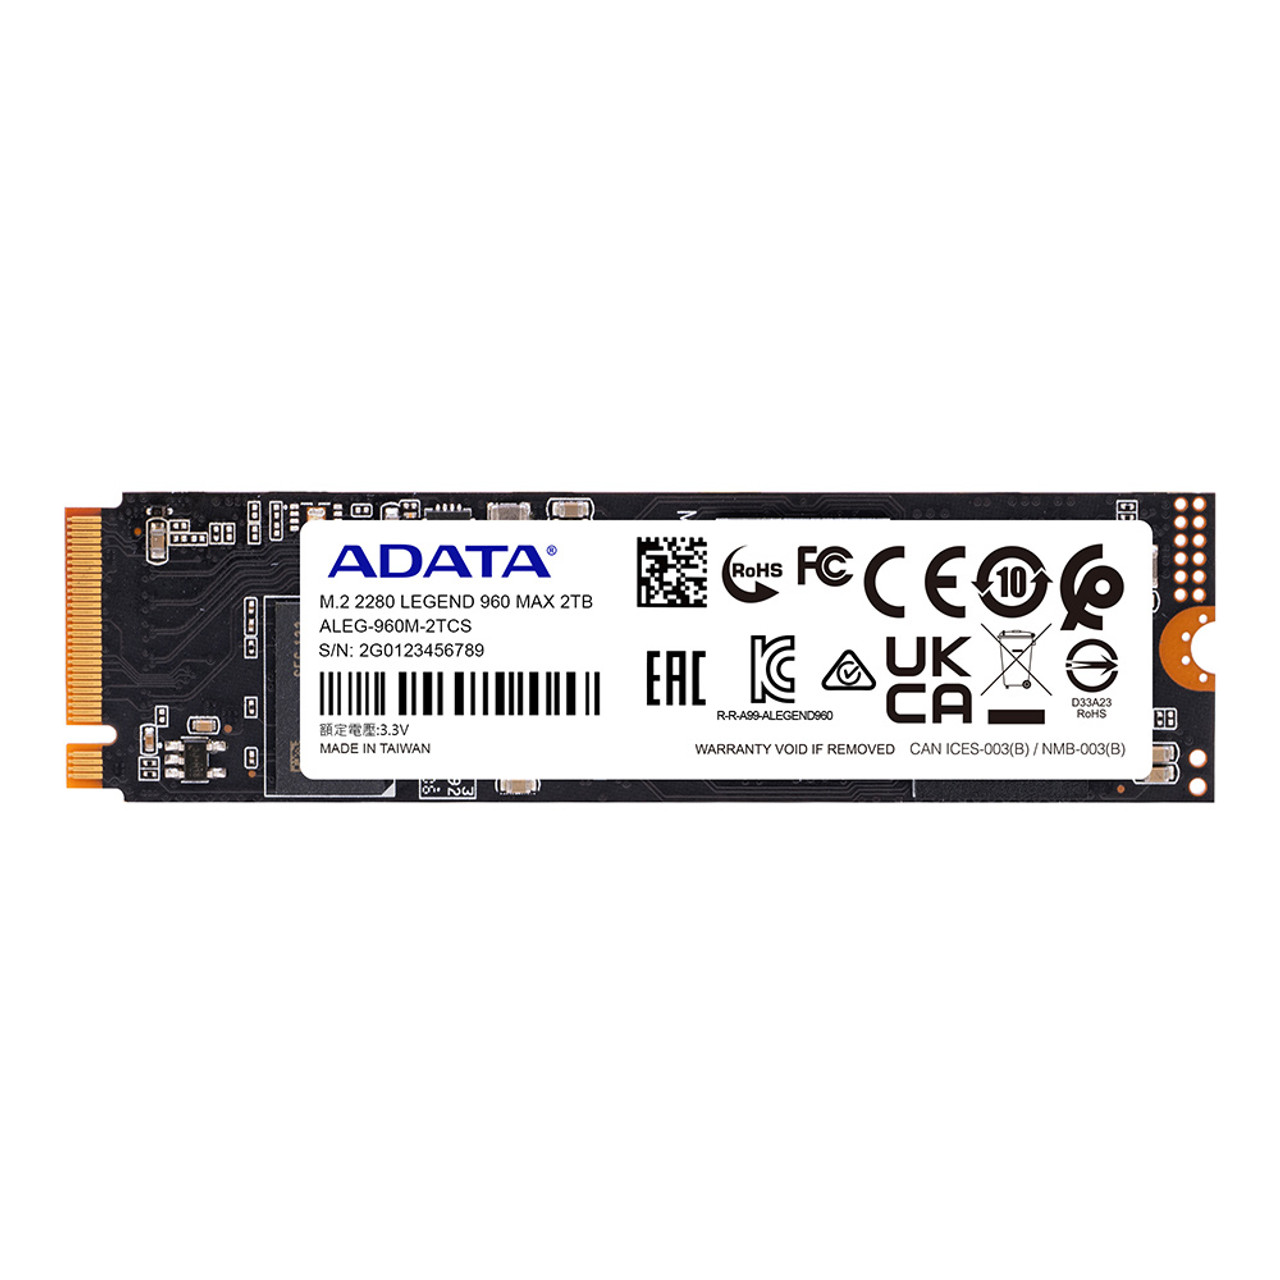 ADATA LEGEND 960 MAX 2TB M.2 2280 PCIe Gen4x4 Internal Solid State Drive |  1560TBW - SMI SM2264 3D NAND | Up to 7400 MBps - Black PS5 SSD 2 Terabyte | 